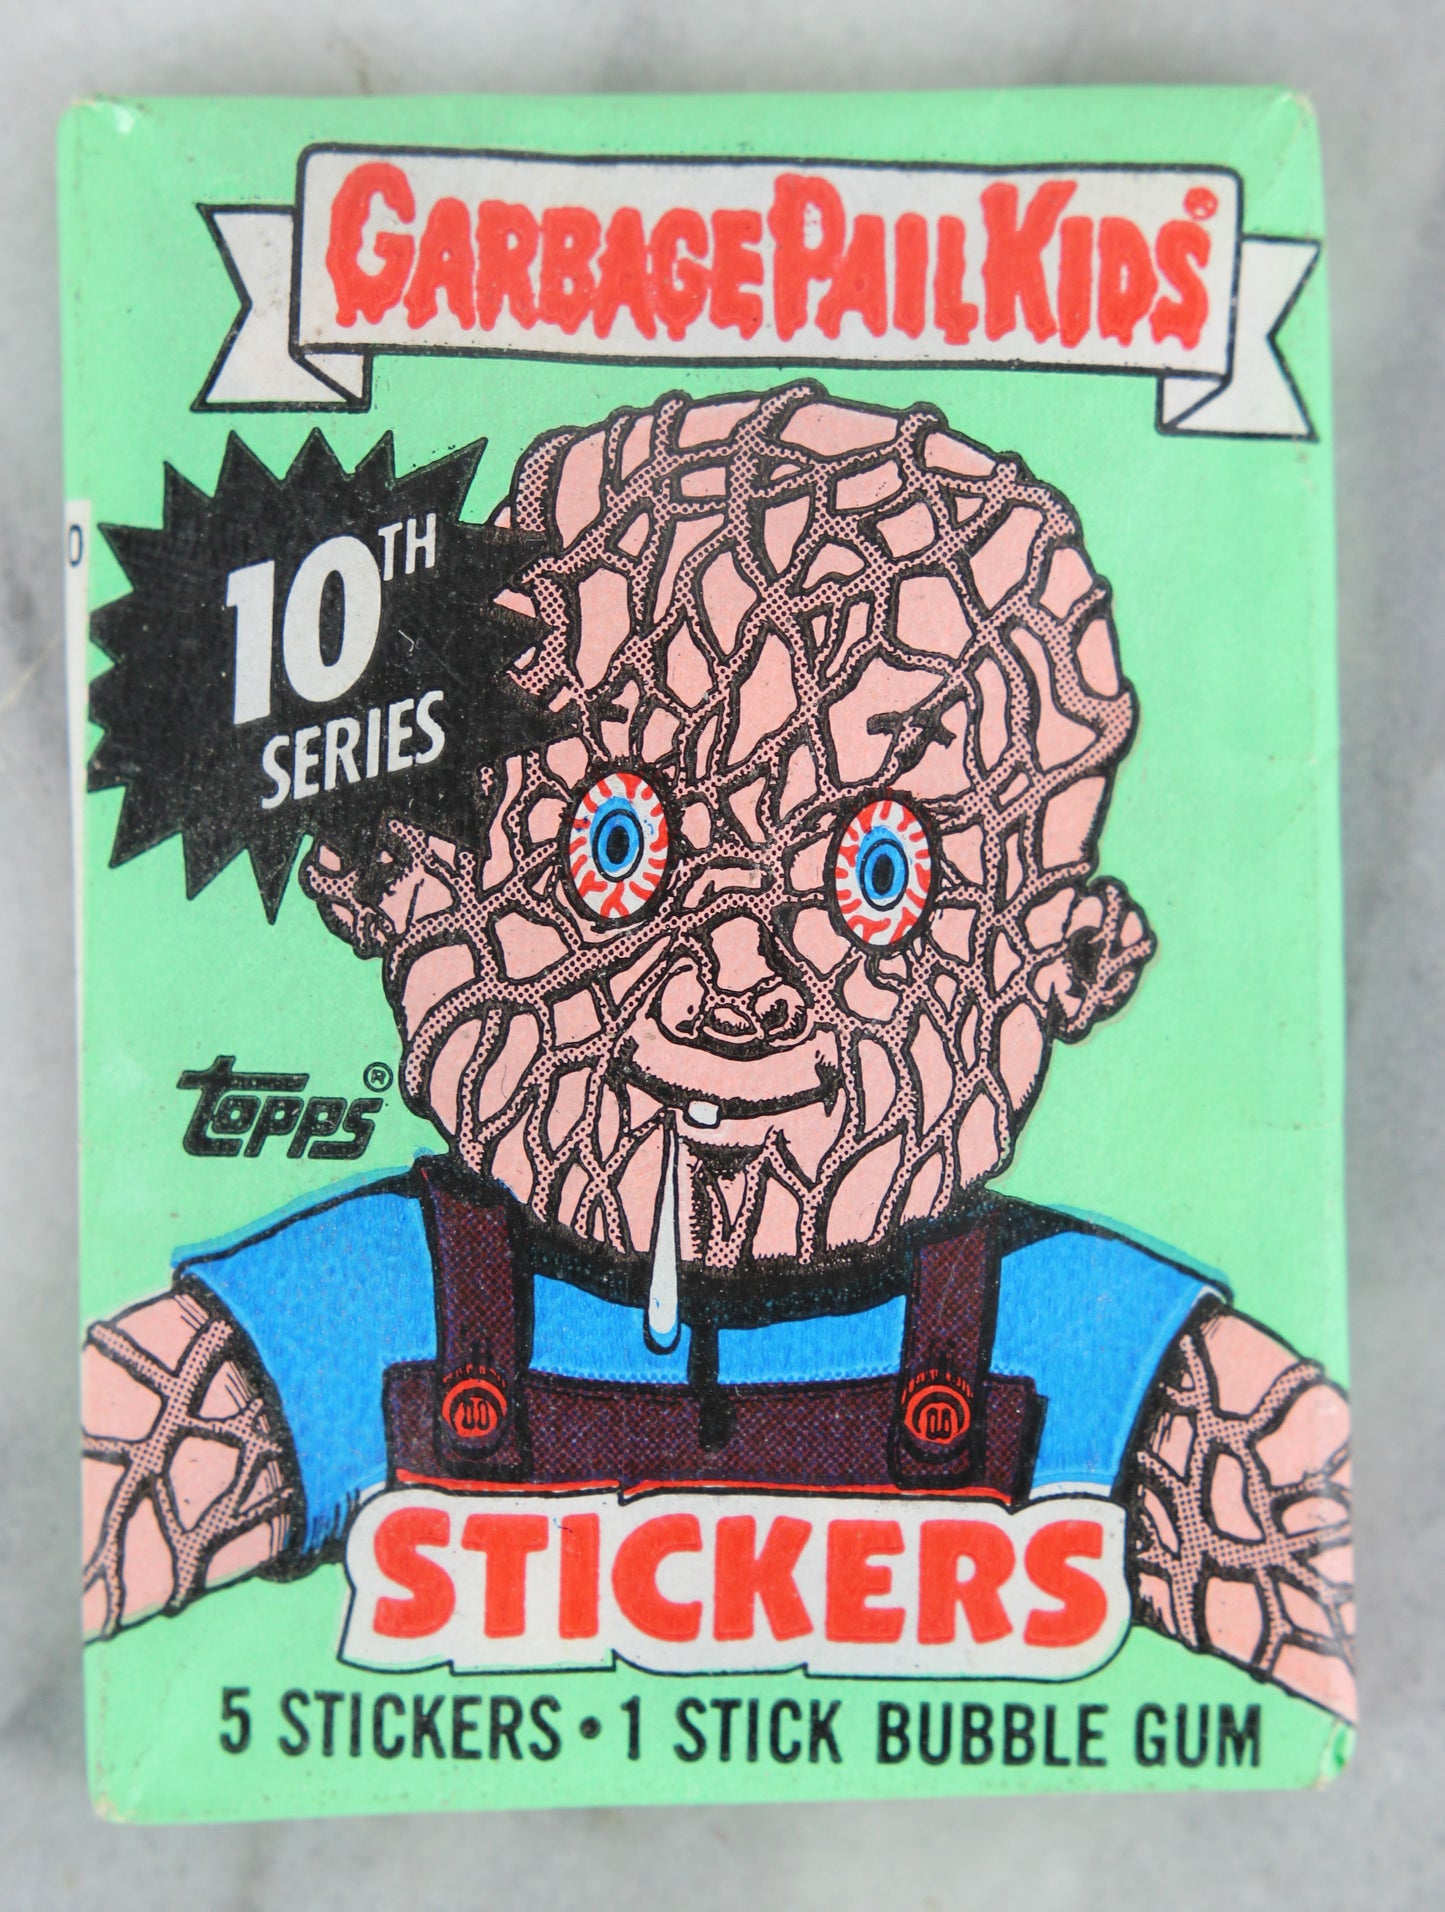 Topps Garbage Pail Kids 10th Series Collectible Trading Card Stickers, One Wax Pack, 1987